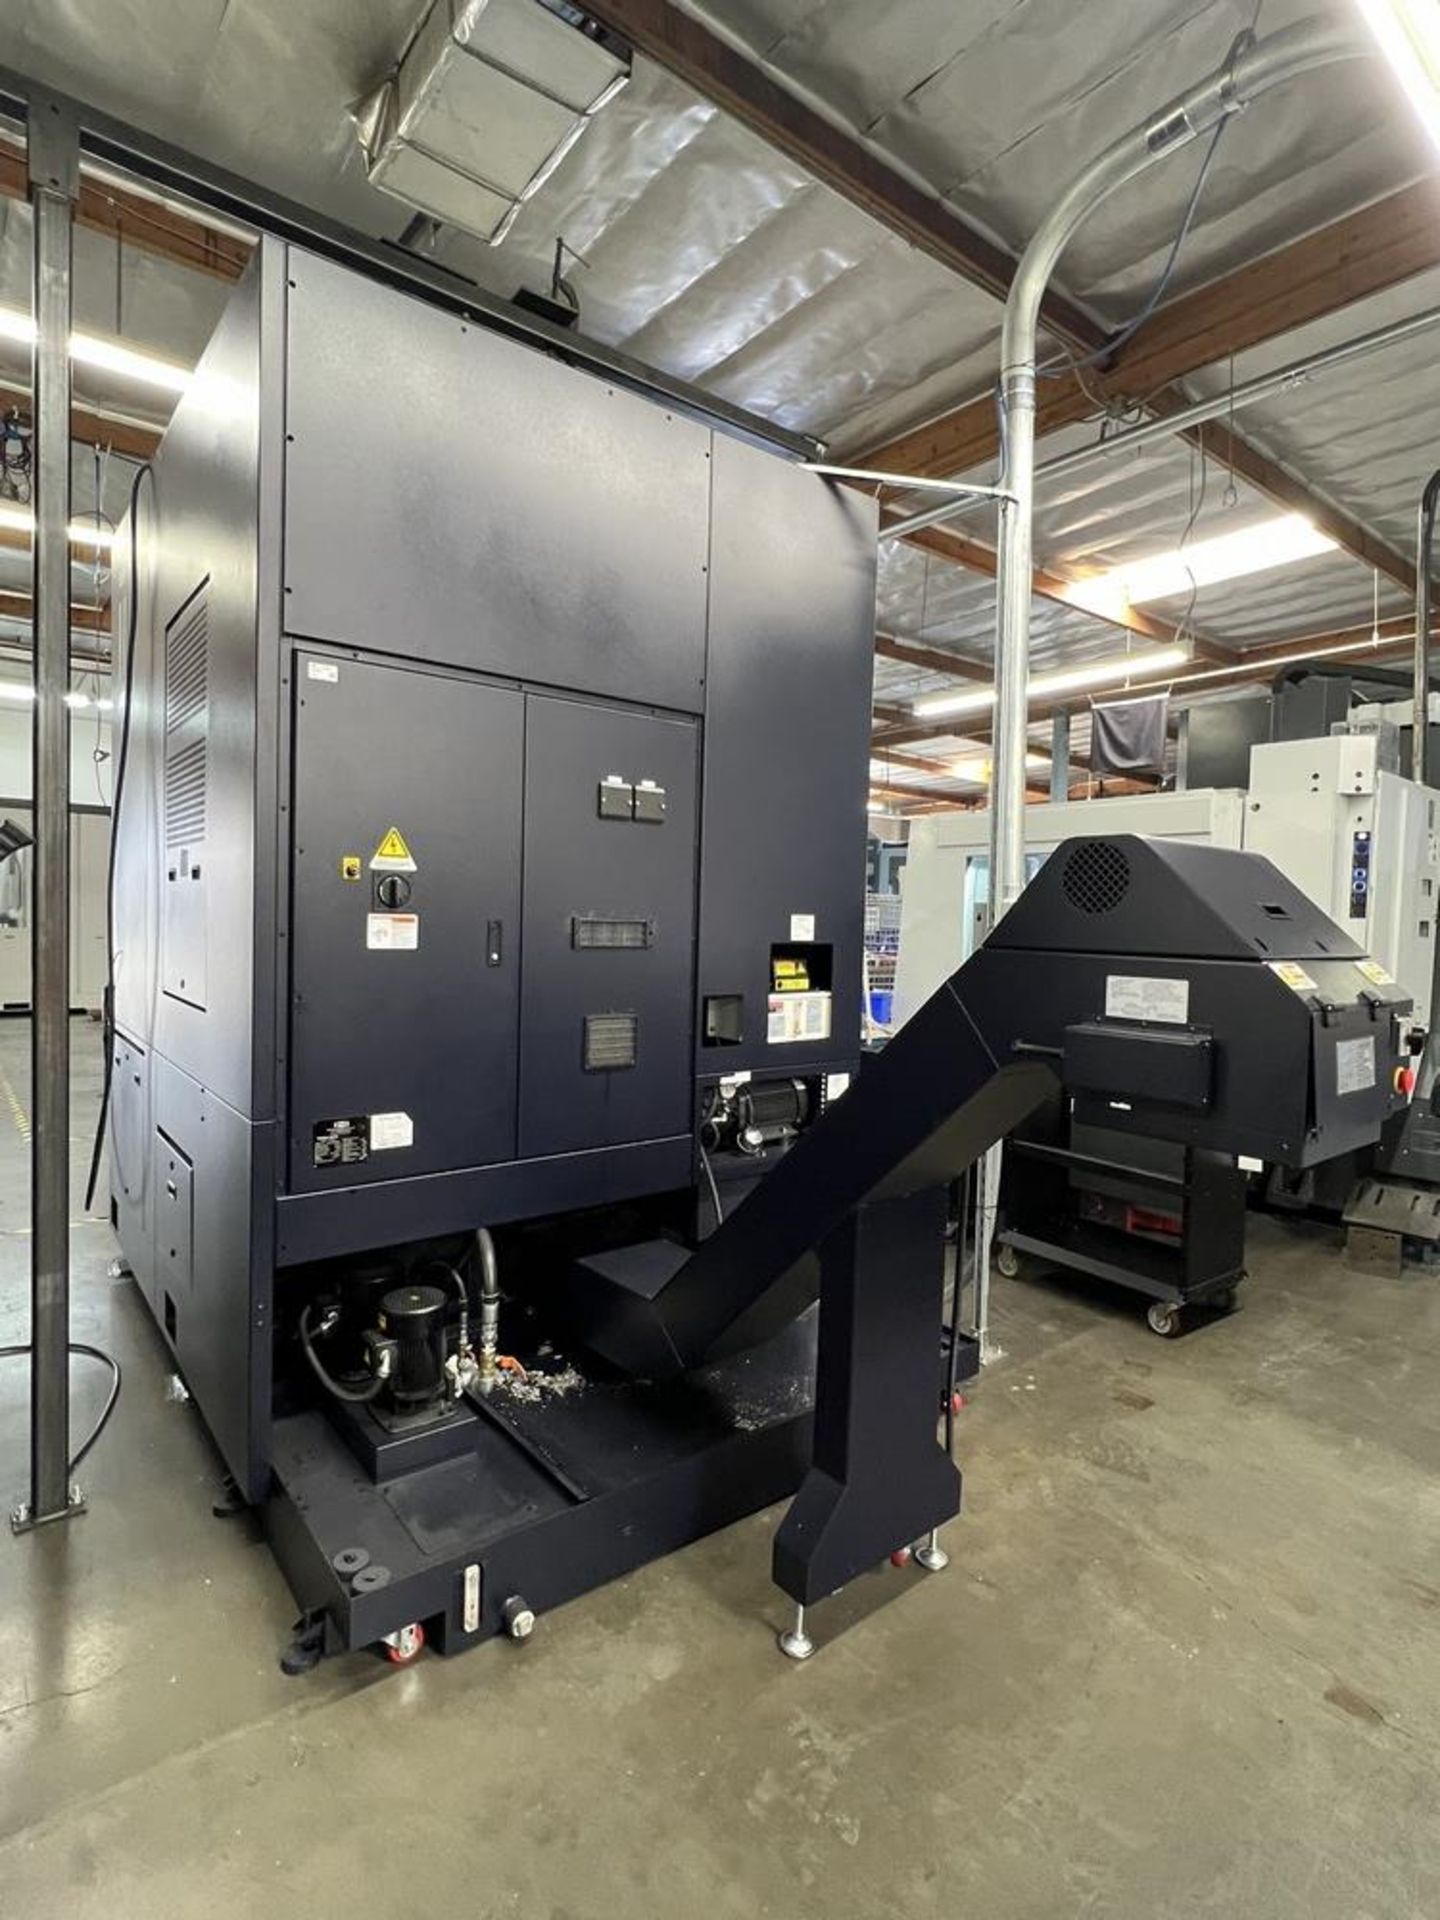 2022 Hwacheon VT-650L, 1500 RPM, 24" Chuck, 12 Station Turret, 35" Max Swing, Max. Turn Height 29. - Image 17 of 28